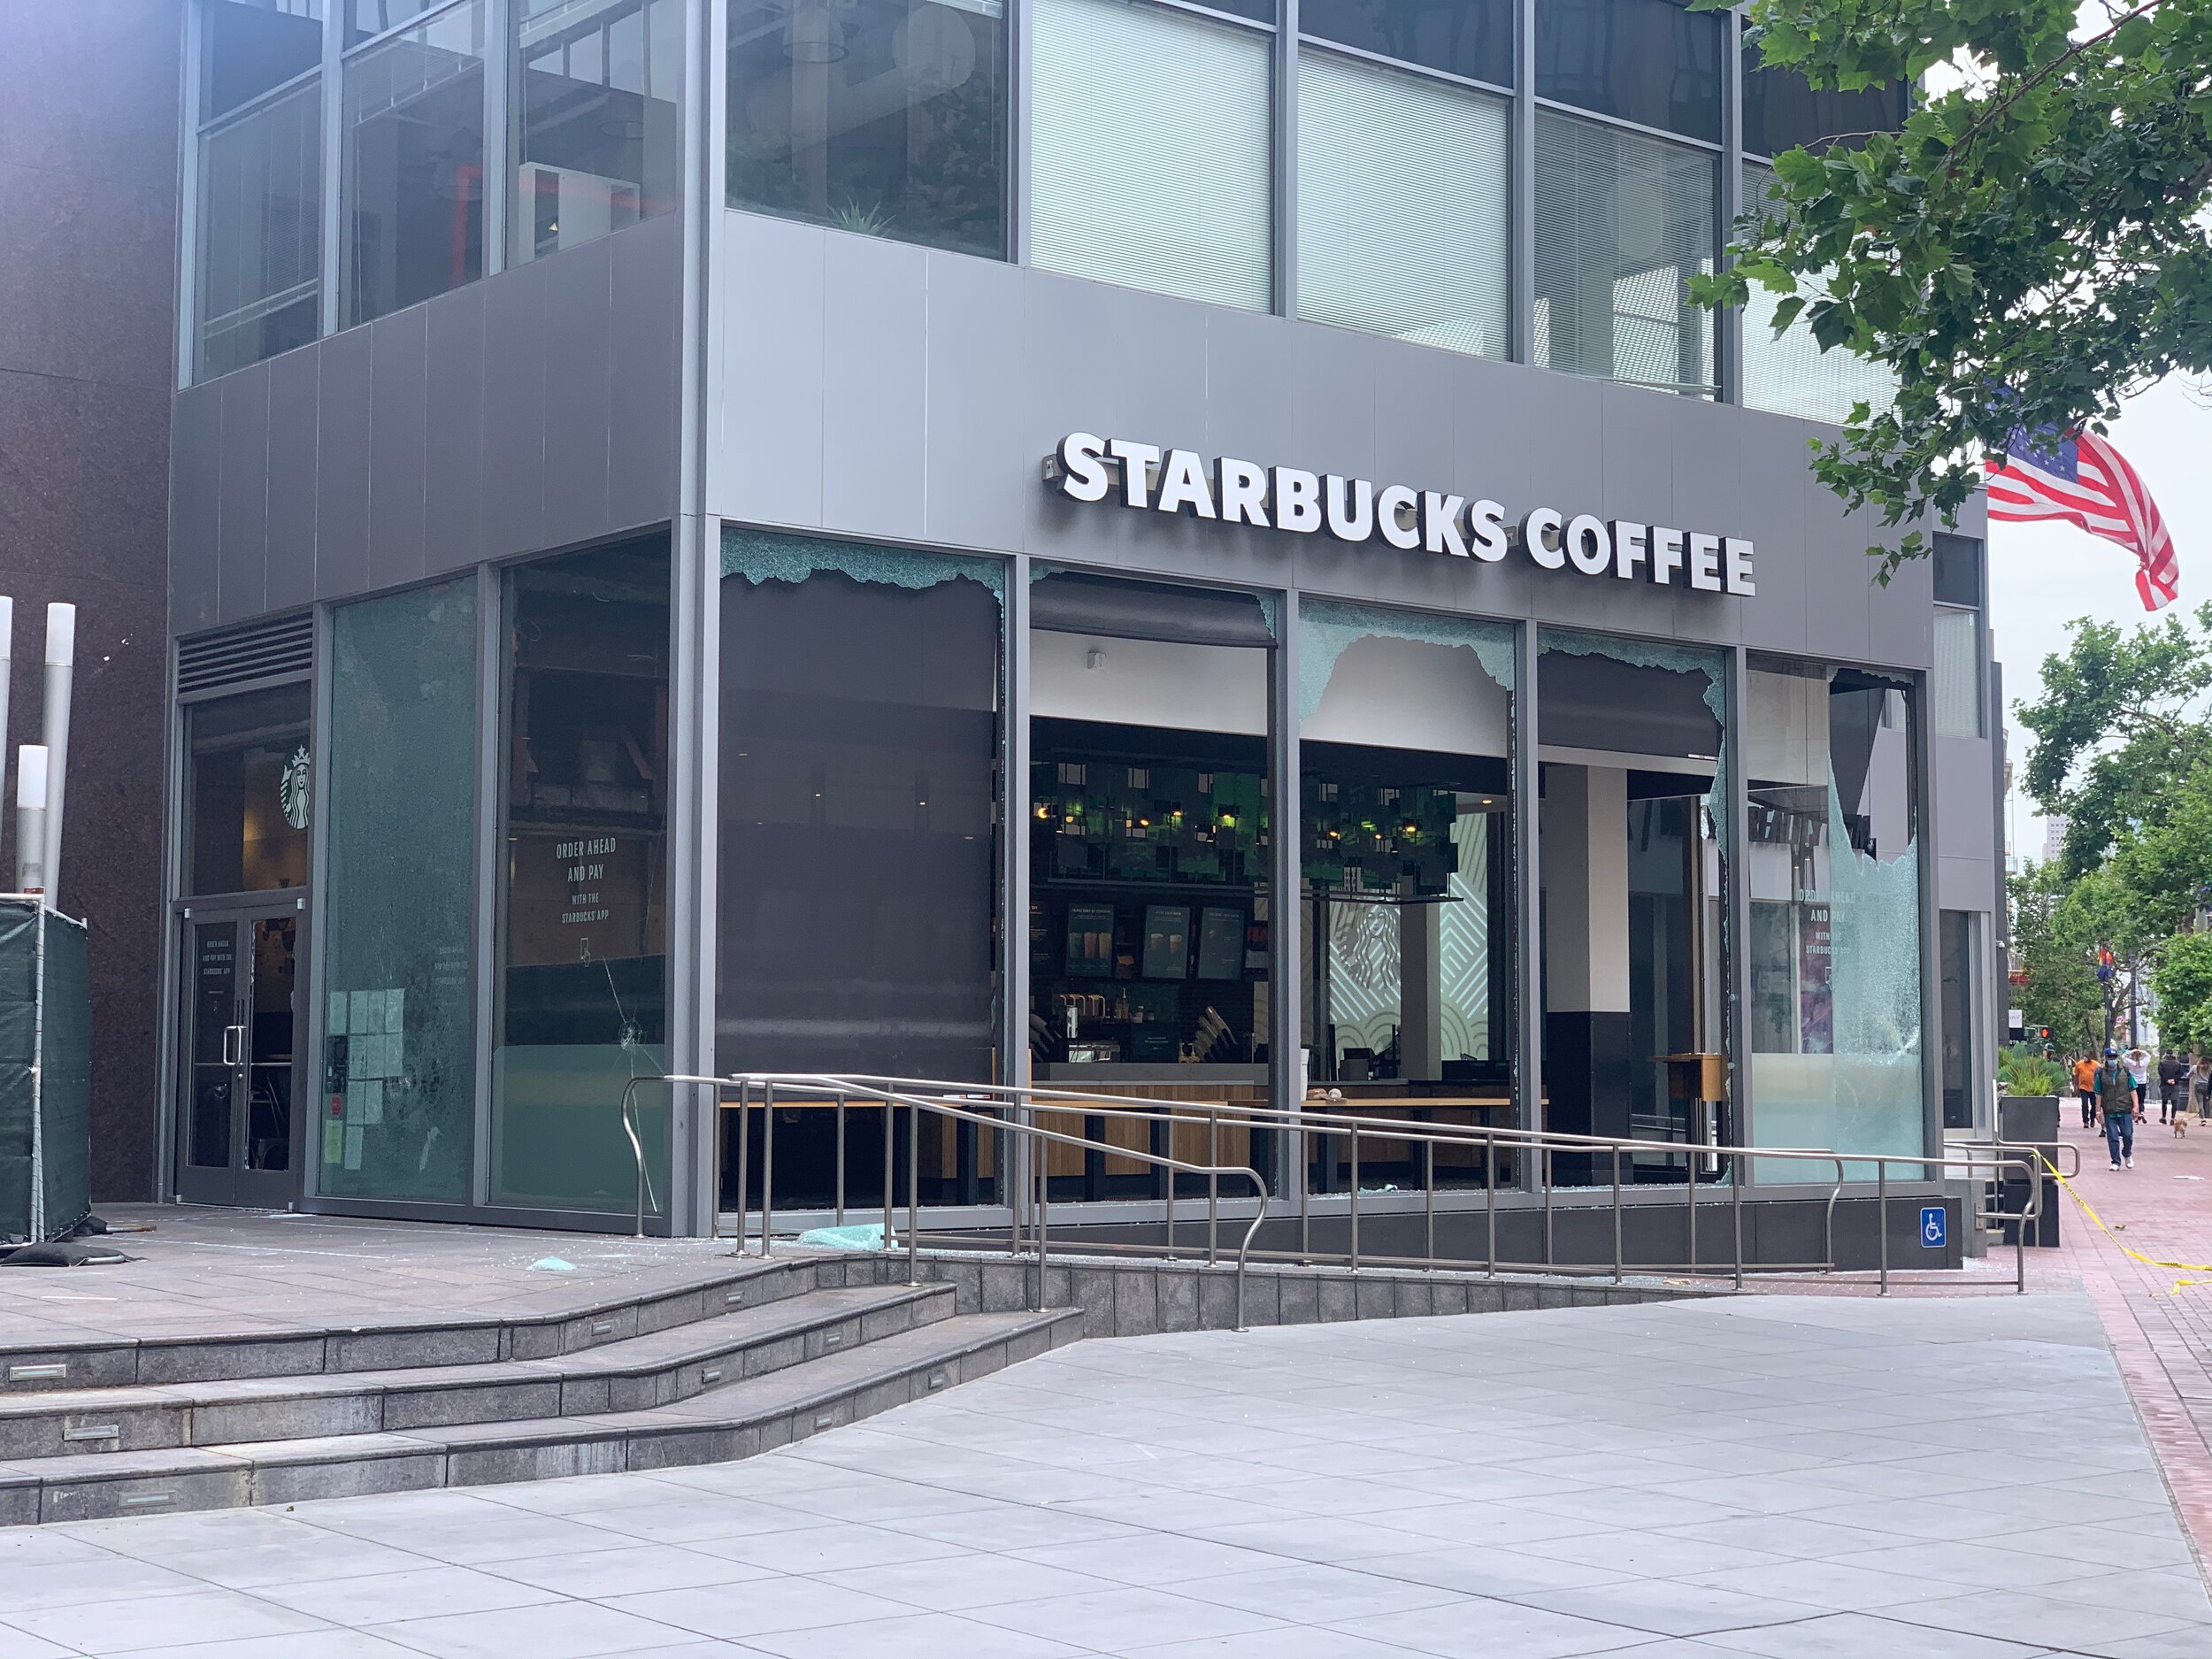  Starbucks at Market and 10th morning after looting.   June 31, 2020 